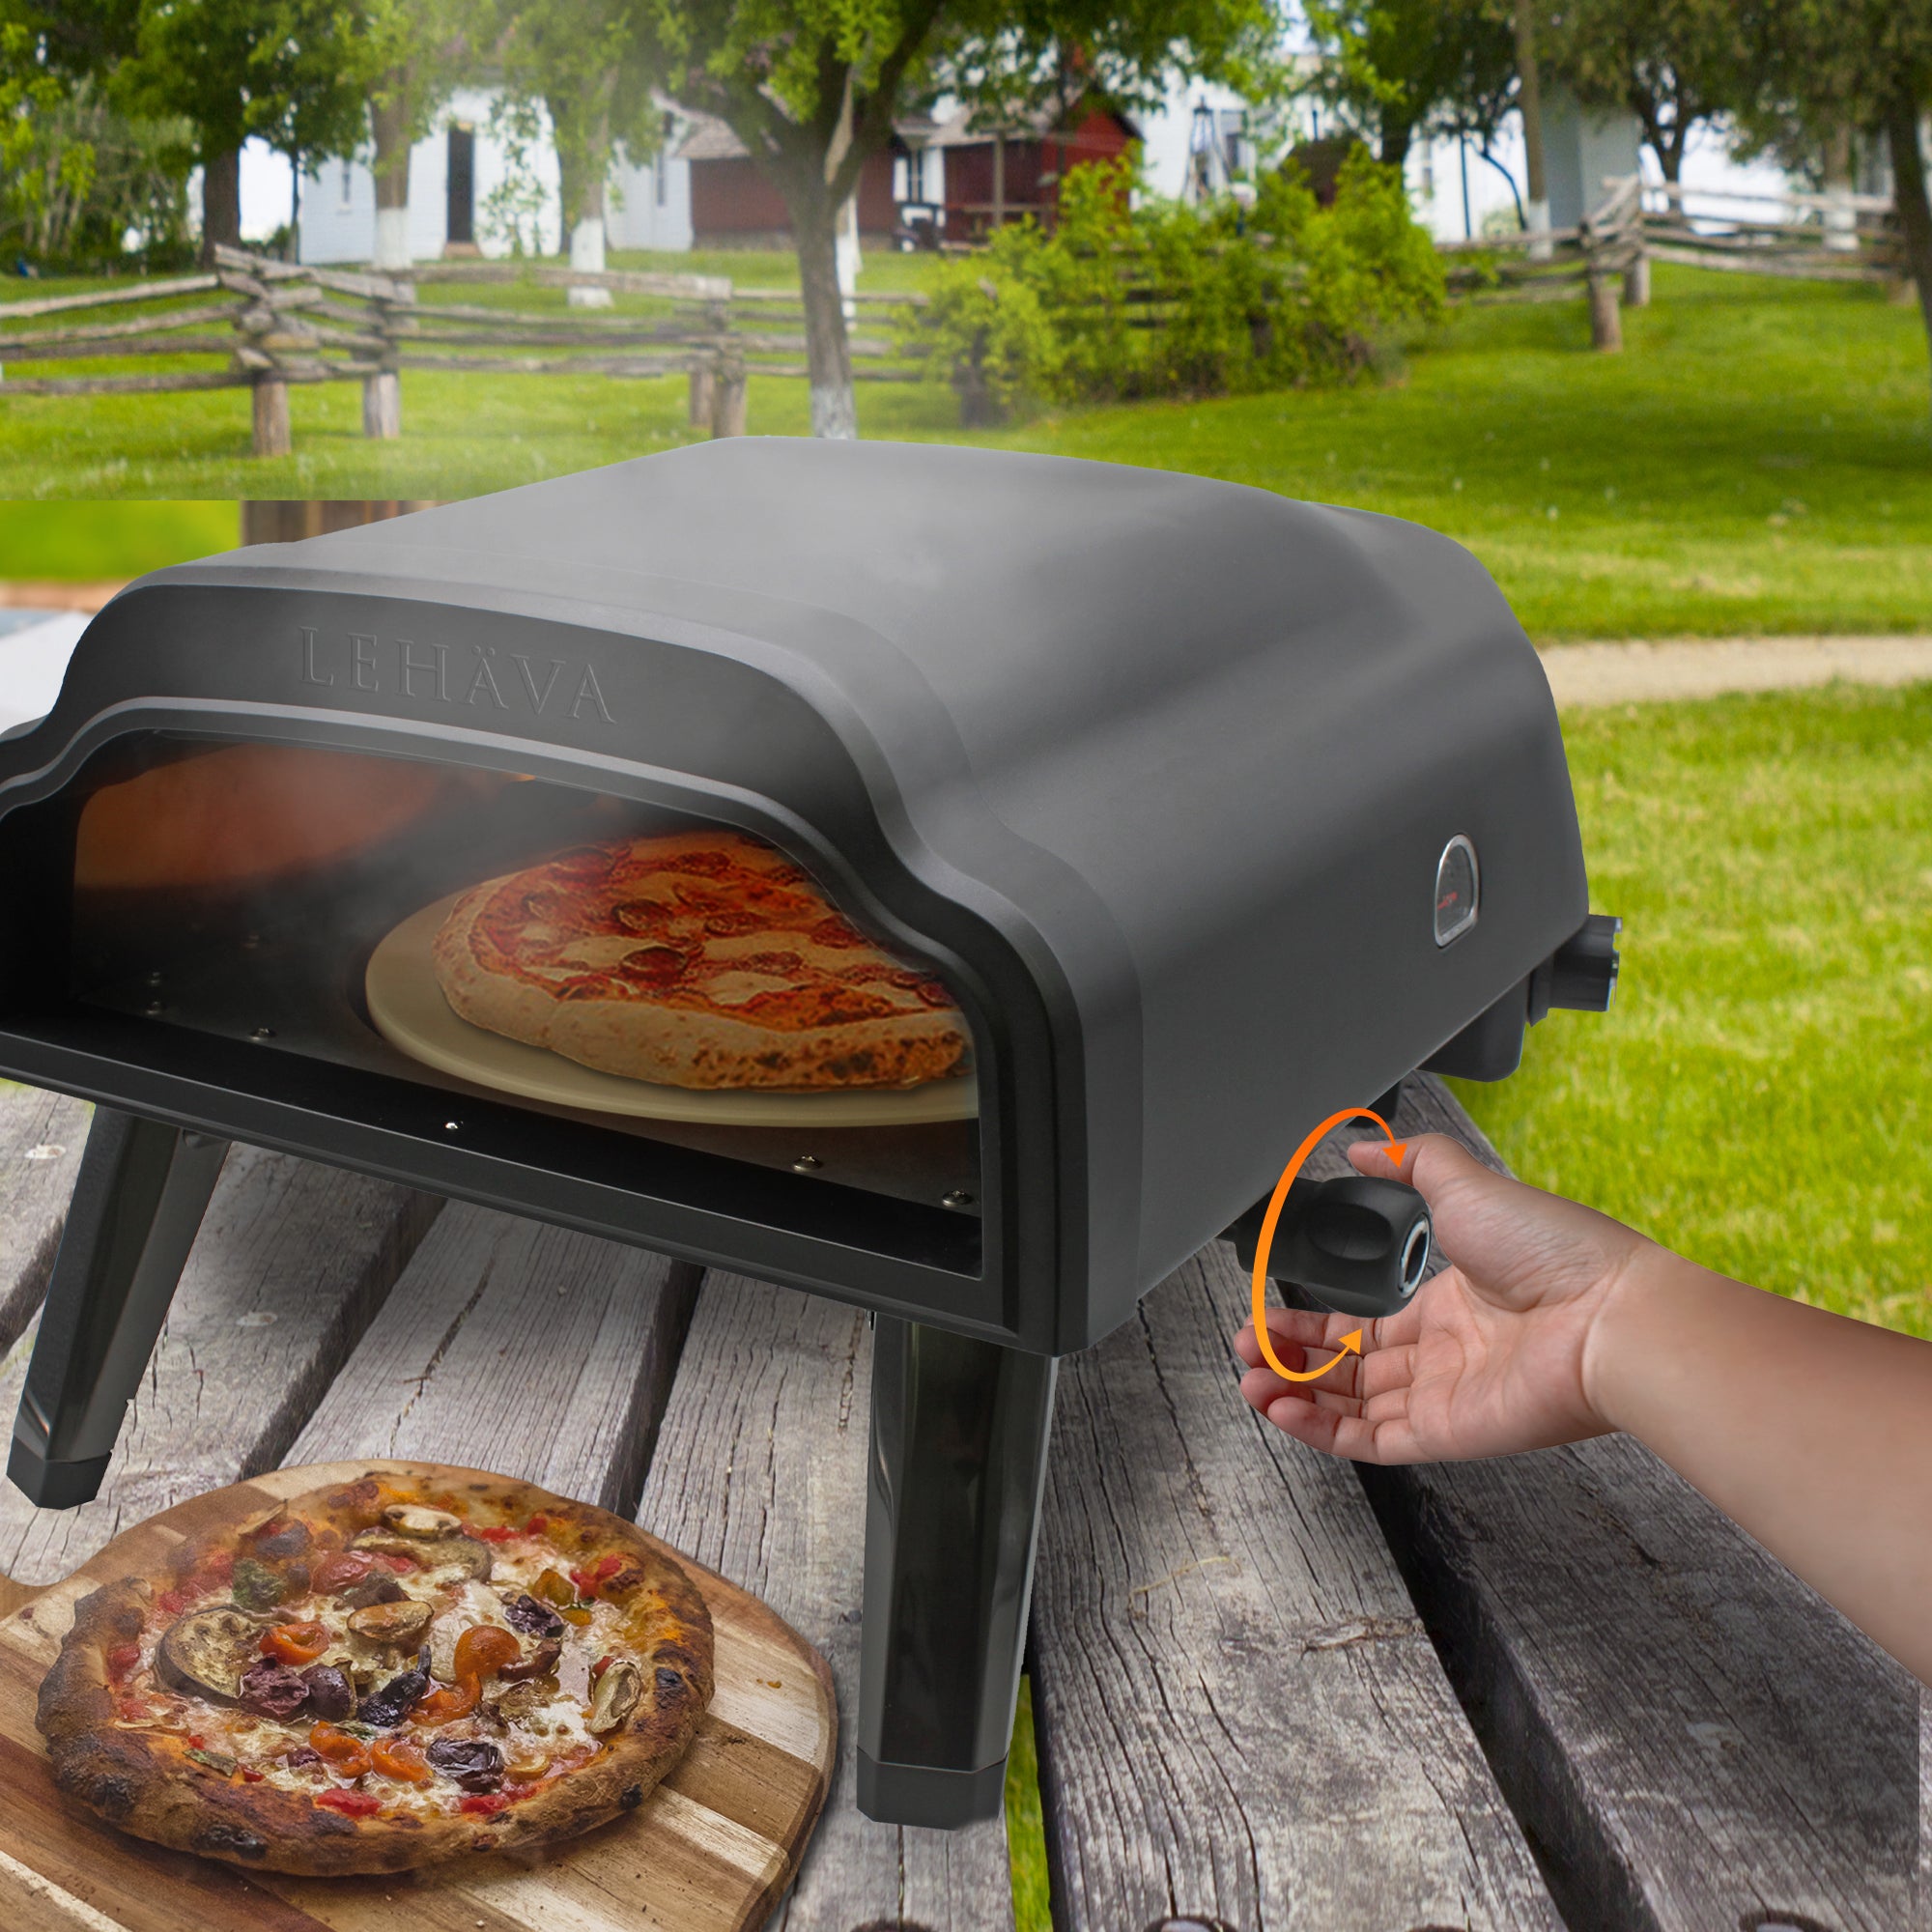 Flame King Outdoor Portable 14-inch Propane Pizza Oven Gas 360 Degree Rotating Stone